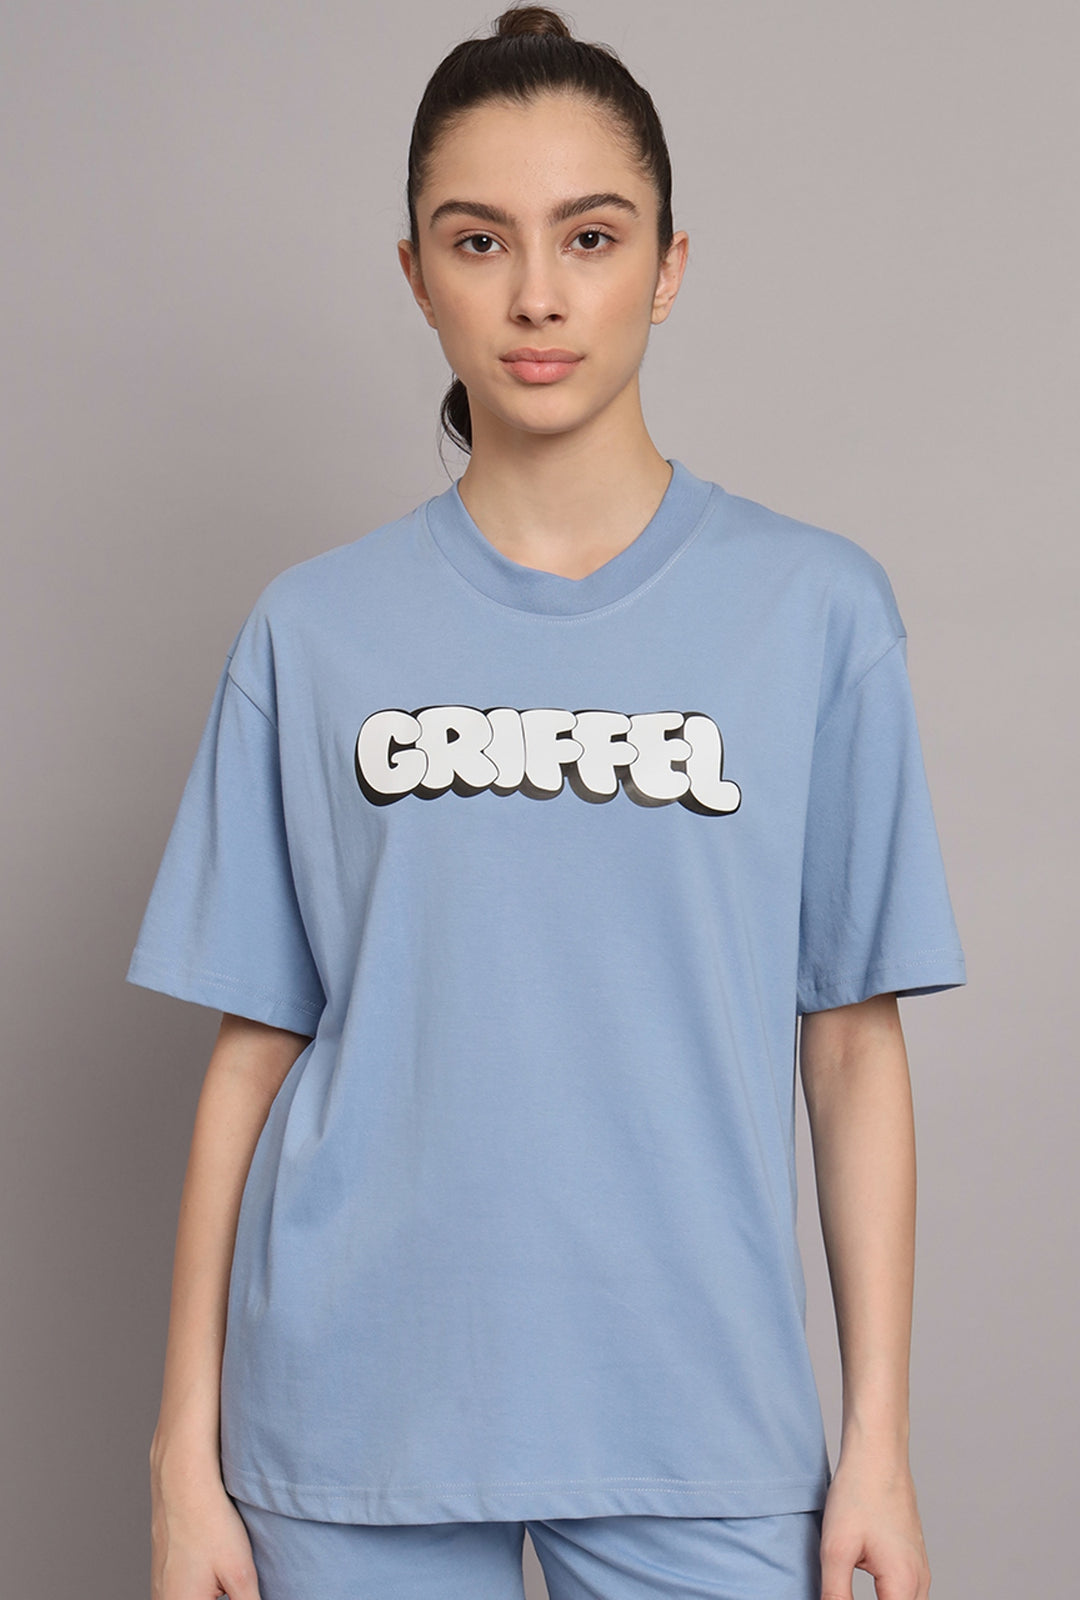 GRIFFEL Women Printed Loose fit Sky Blue T-shirt - griffel